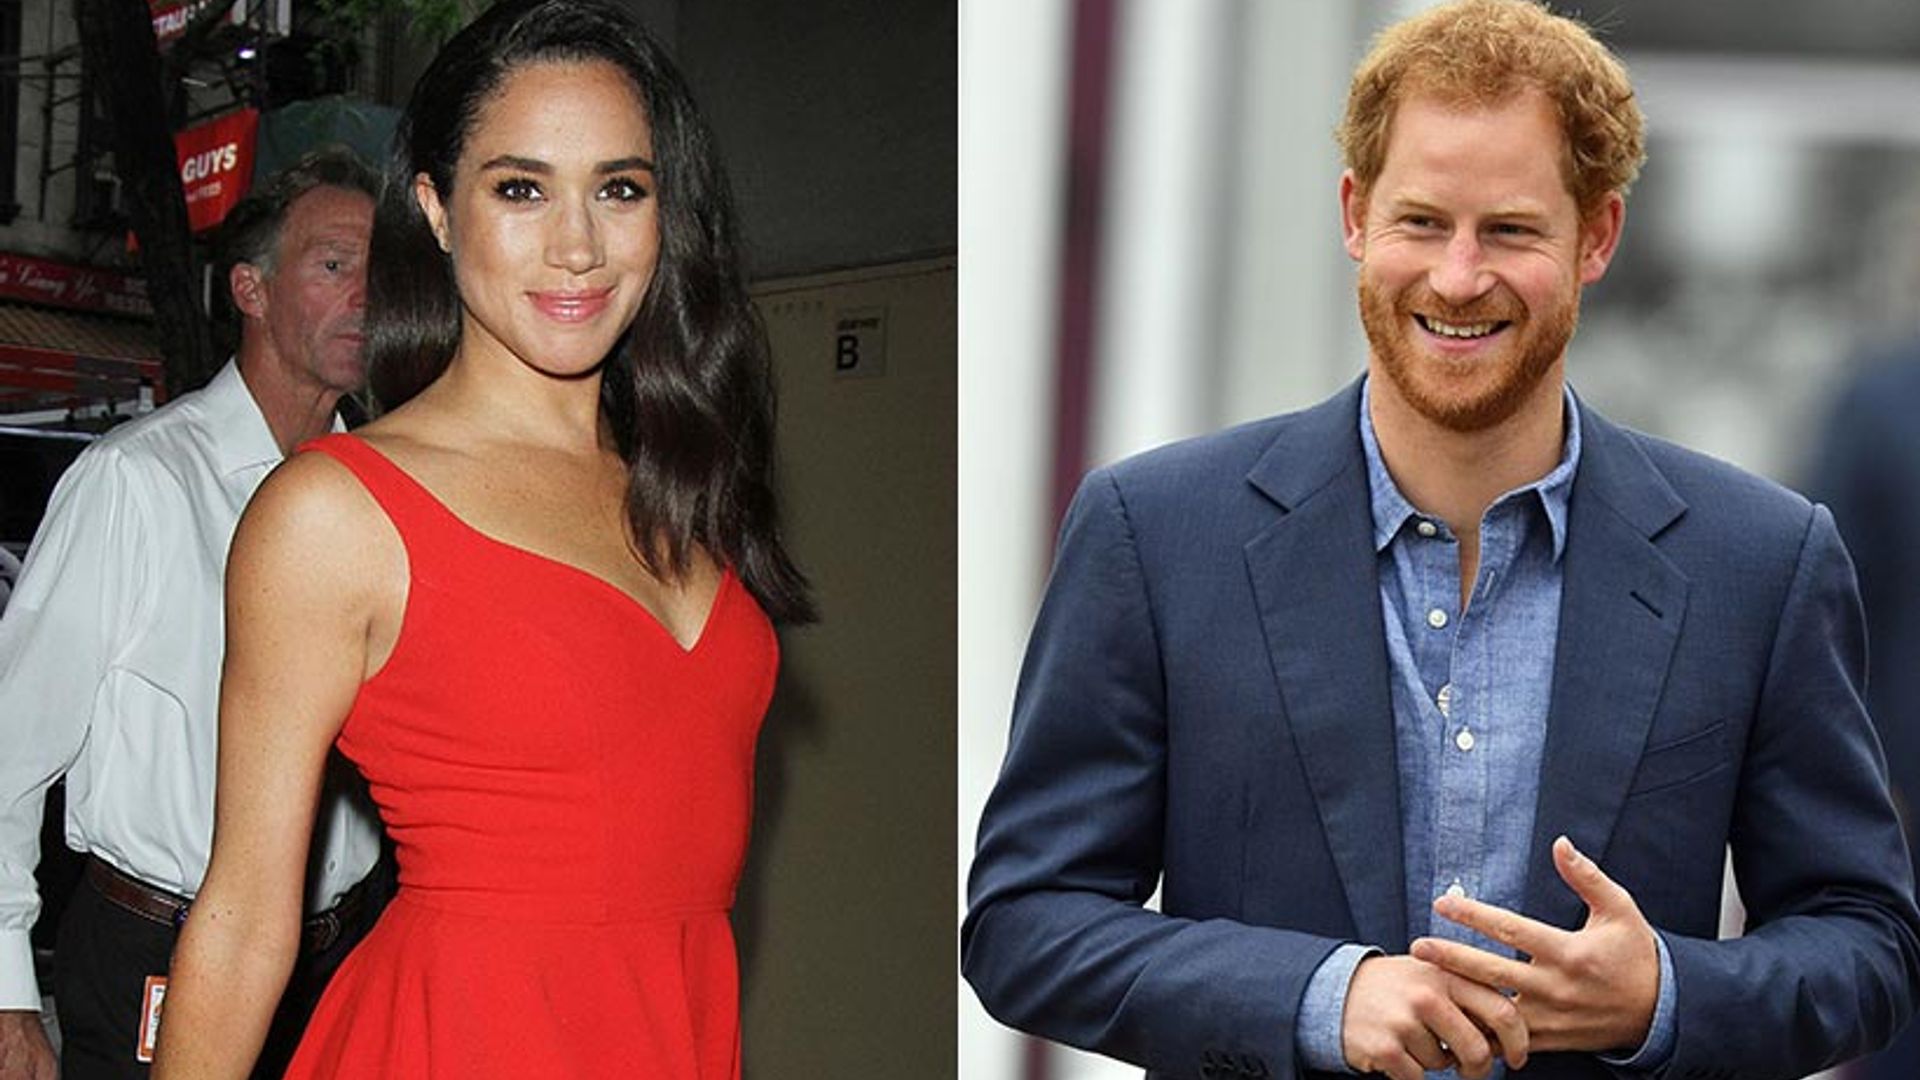 WATCH: The moment Meghan Markle chooses Prince Harry in HELLO!'s exclusive video!